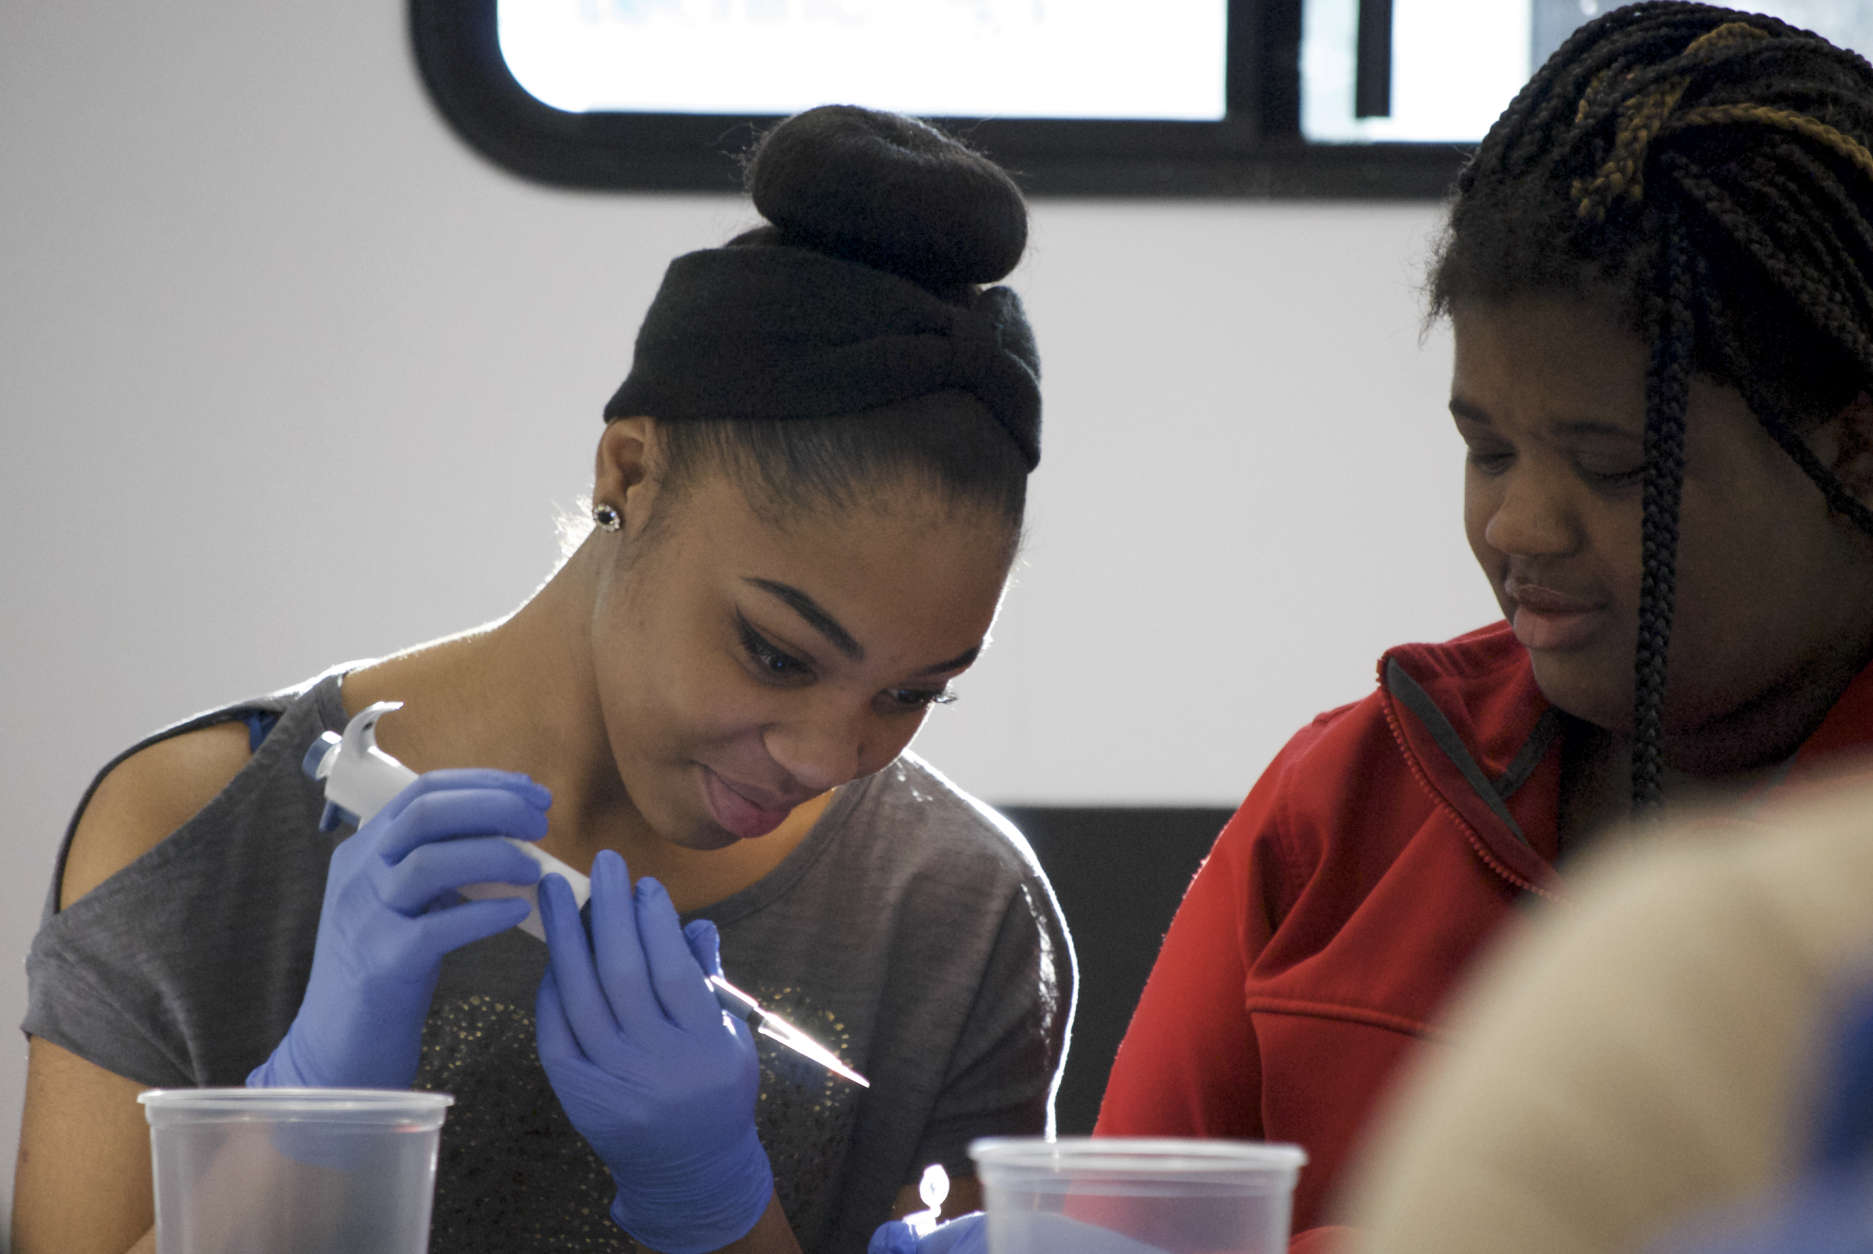 Students participate in a science activity inside the trailer. (Courtesy MdBio Foundation)